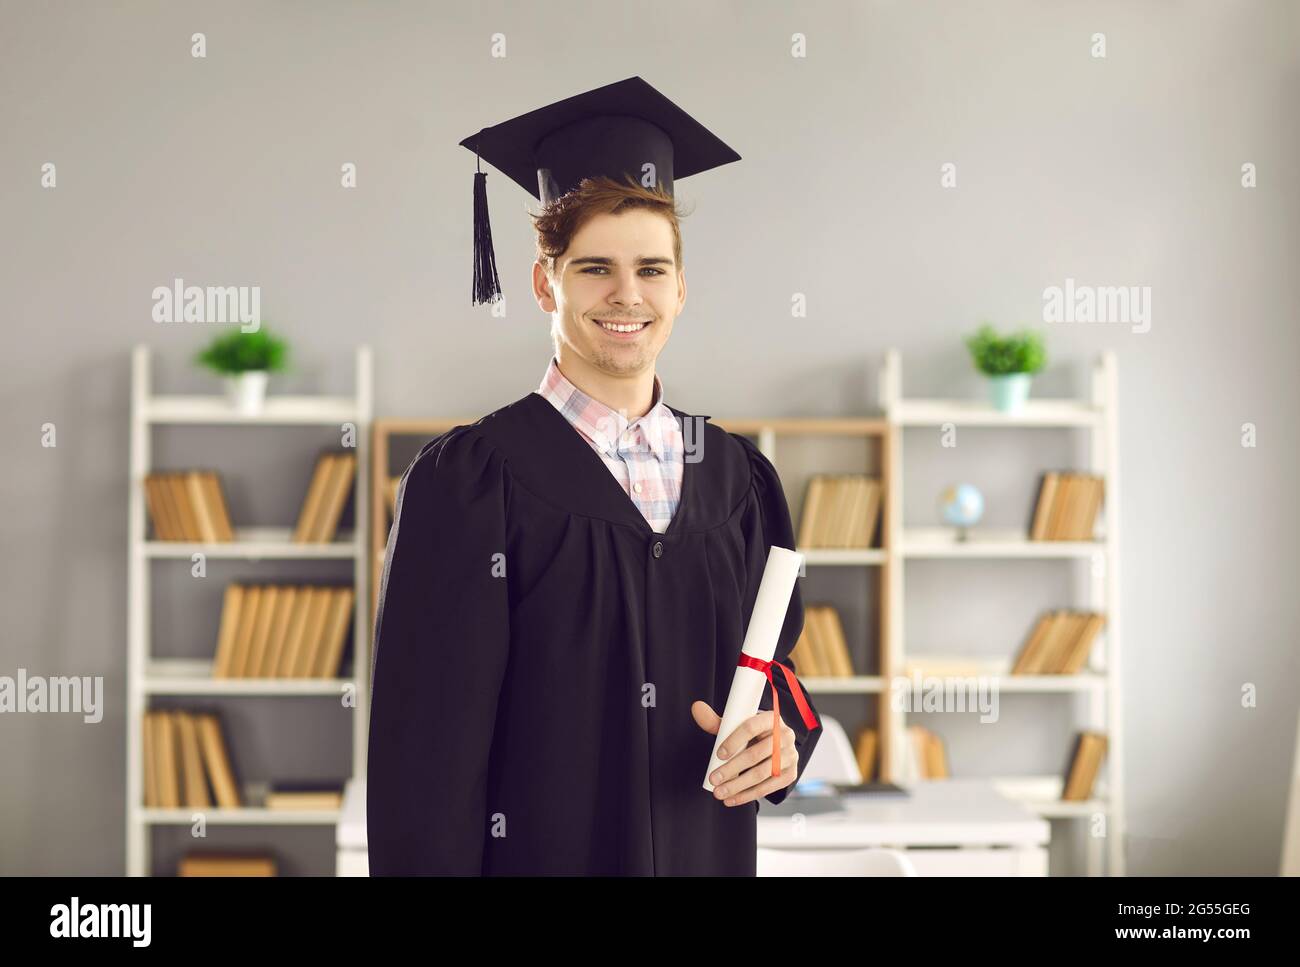 Graduation portrait of happy university student holding diploma and smiling at camera Stock Photo